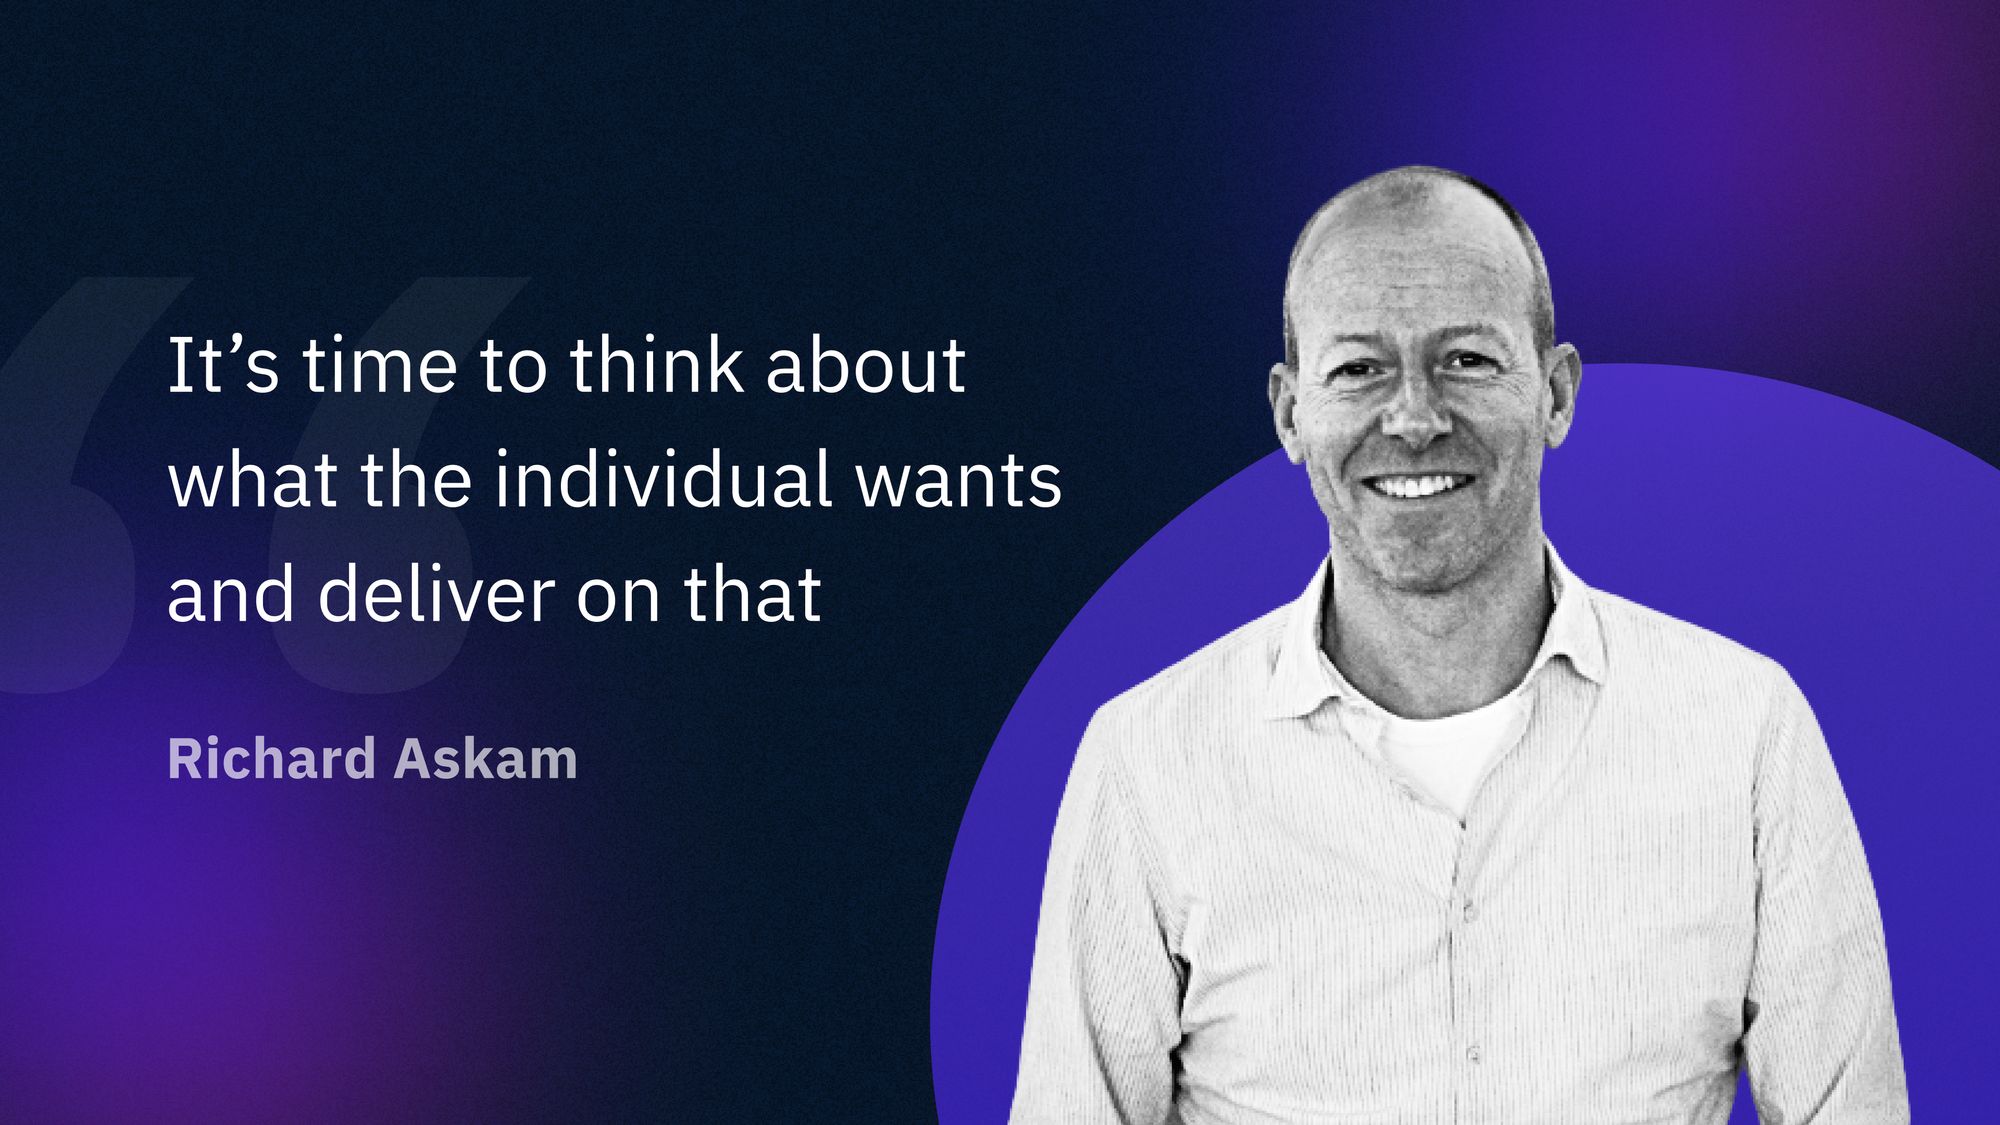 Interview: Talking Personalization With Richard Askam